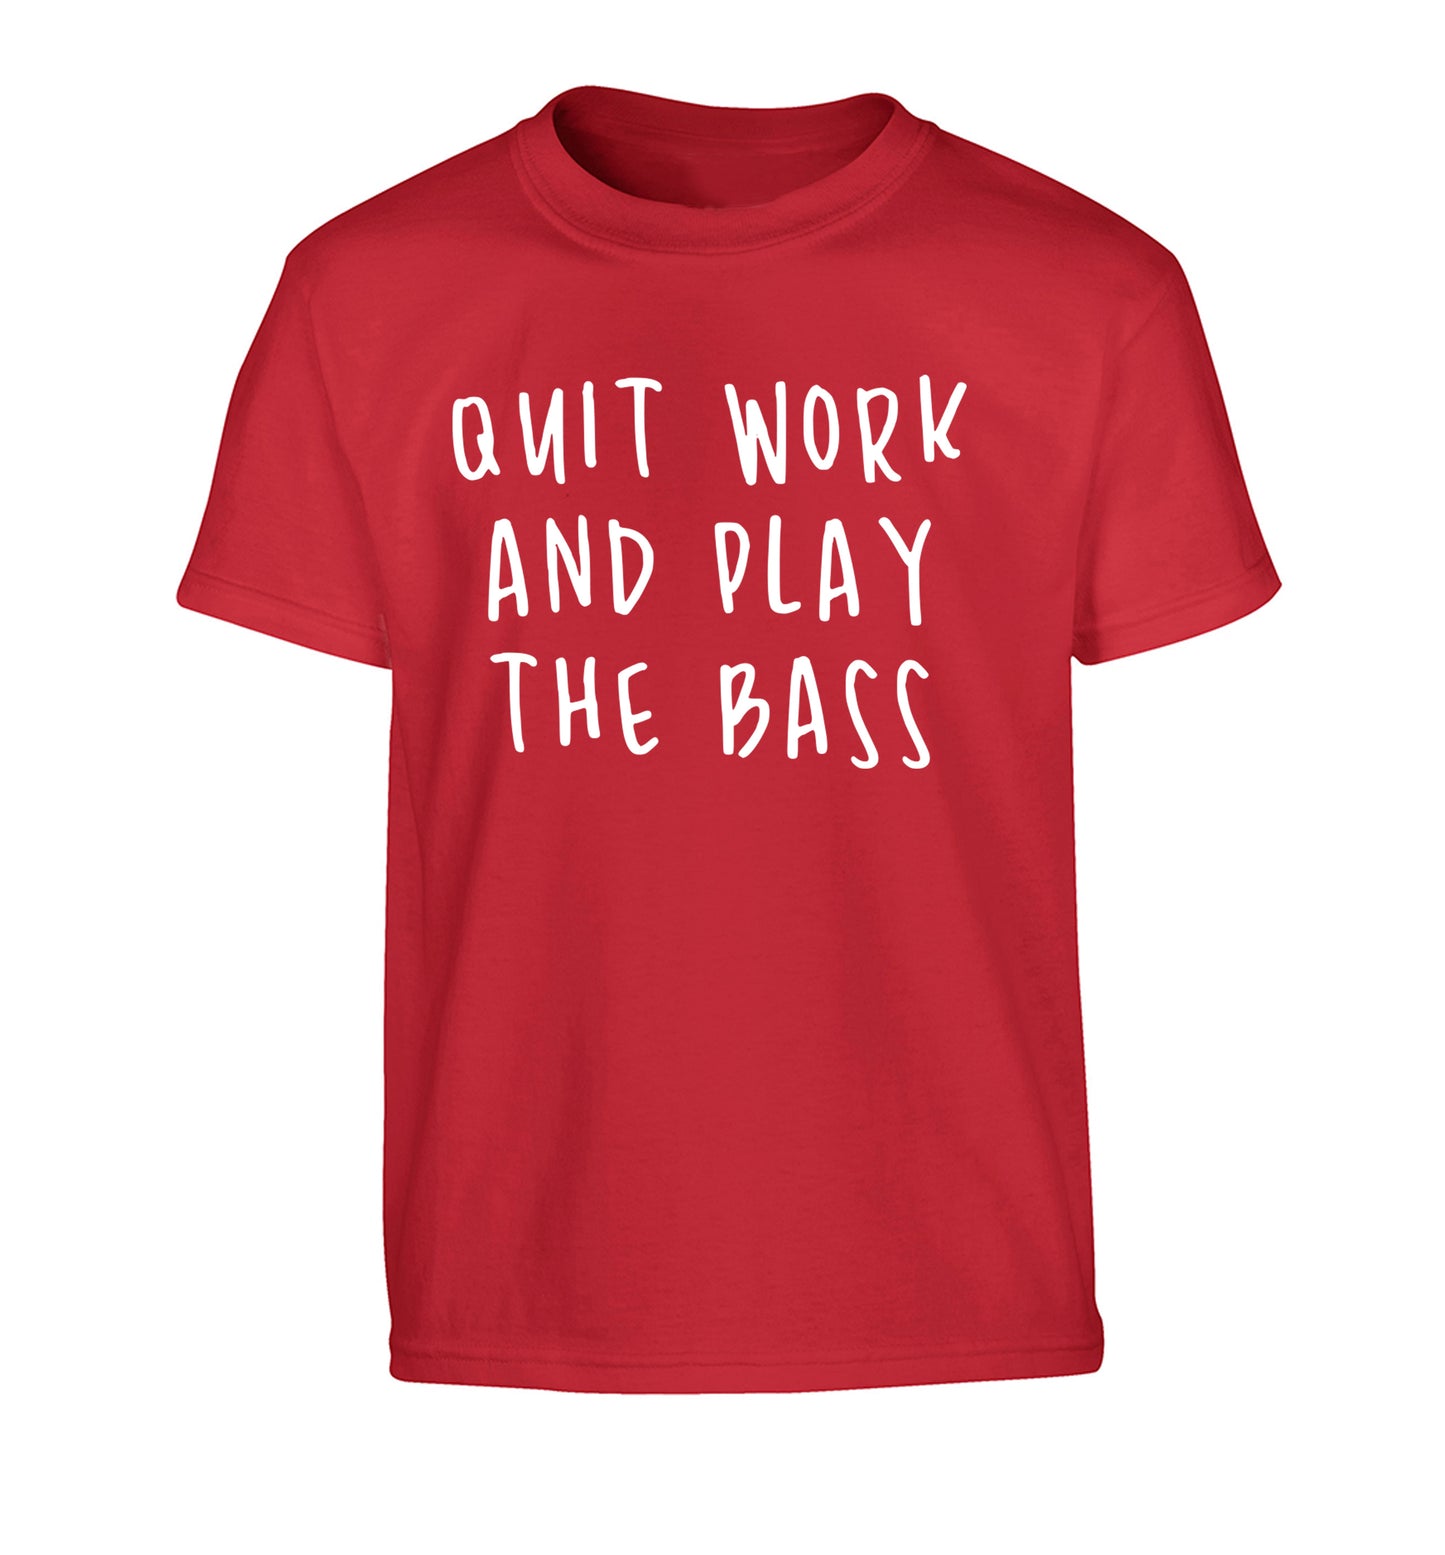 Quit work and play the bass Children's red Tshirt 12-14 Years